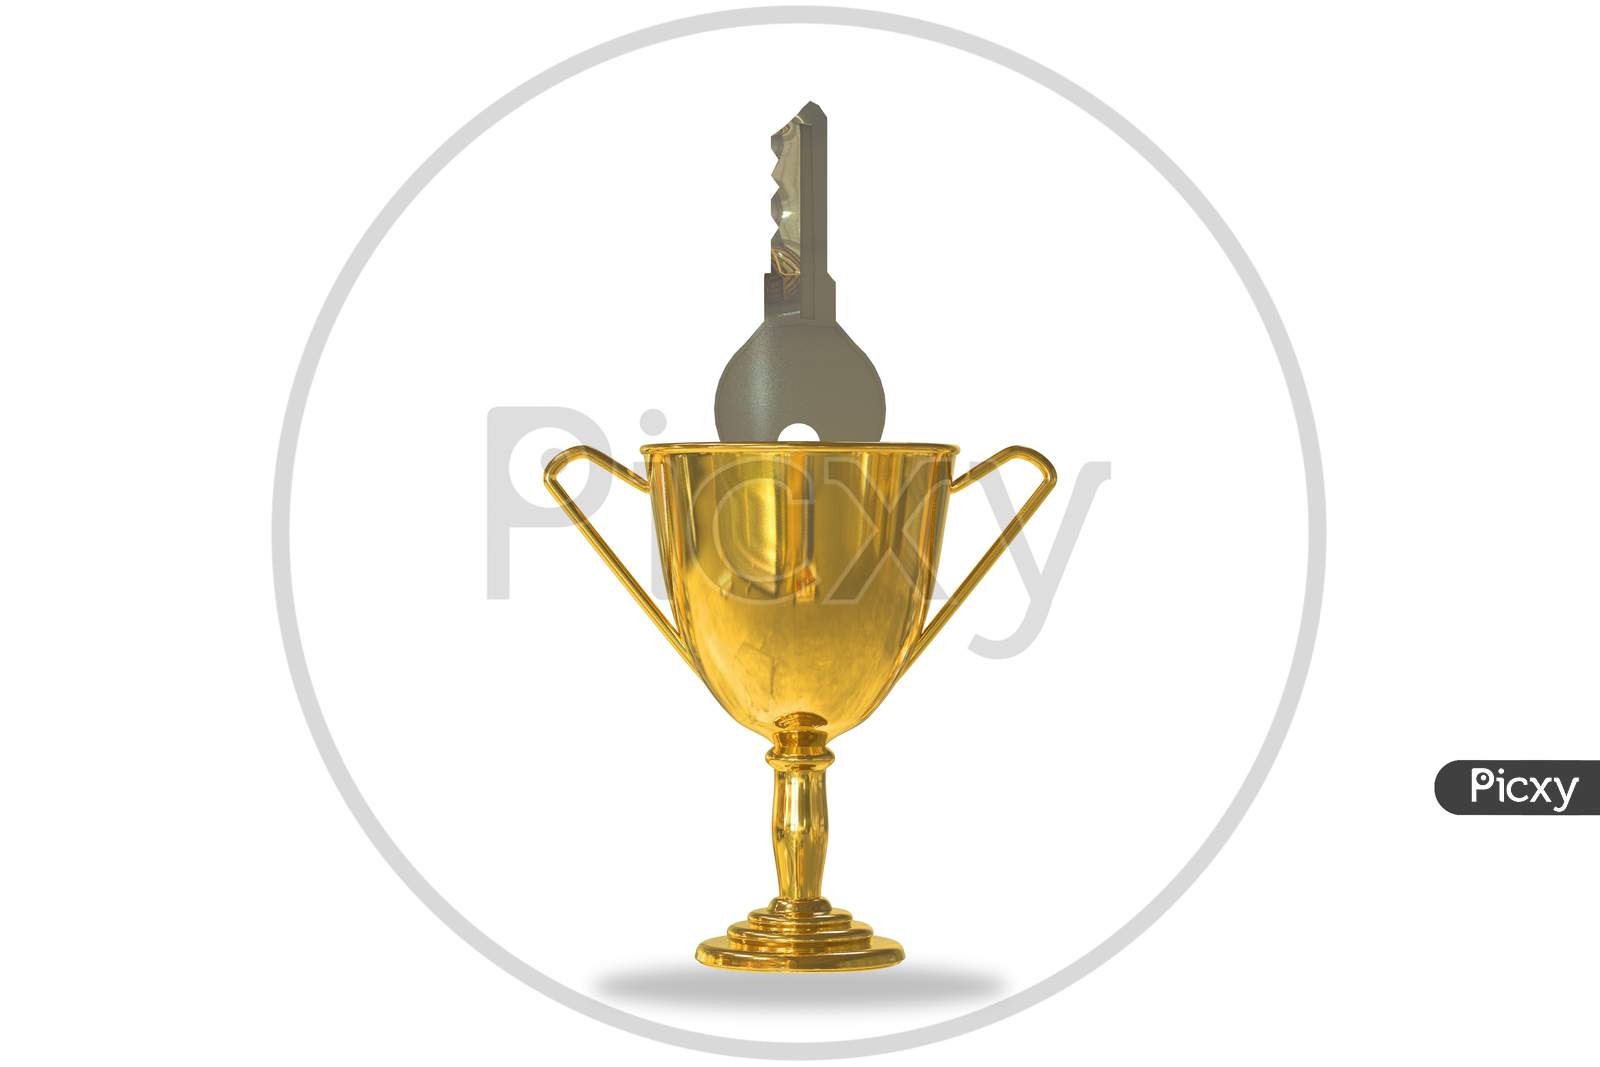 Golden Trophy Cup Isolated On White Background With A Metal Key Inside. Real Estate Agent Or Independent Contractor Or Develop A Business Plan Or Business Expenses Concept. 3D Illustration